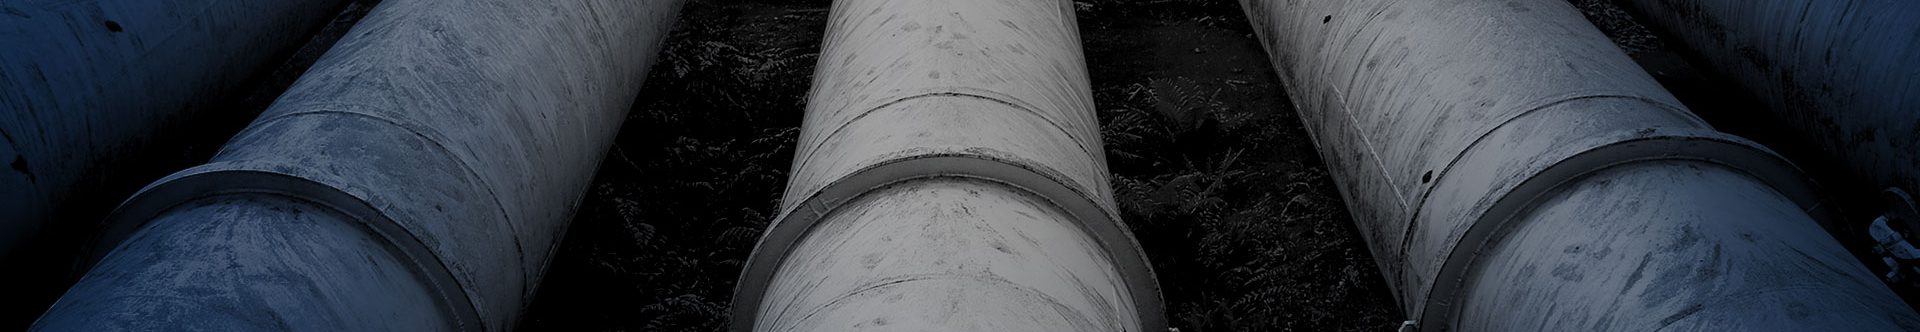 Large industrial pipes laid in a row, black and white image